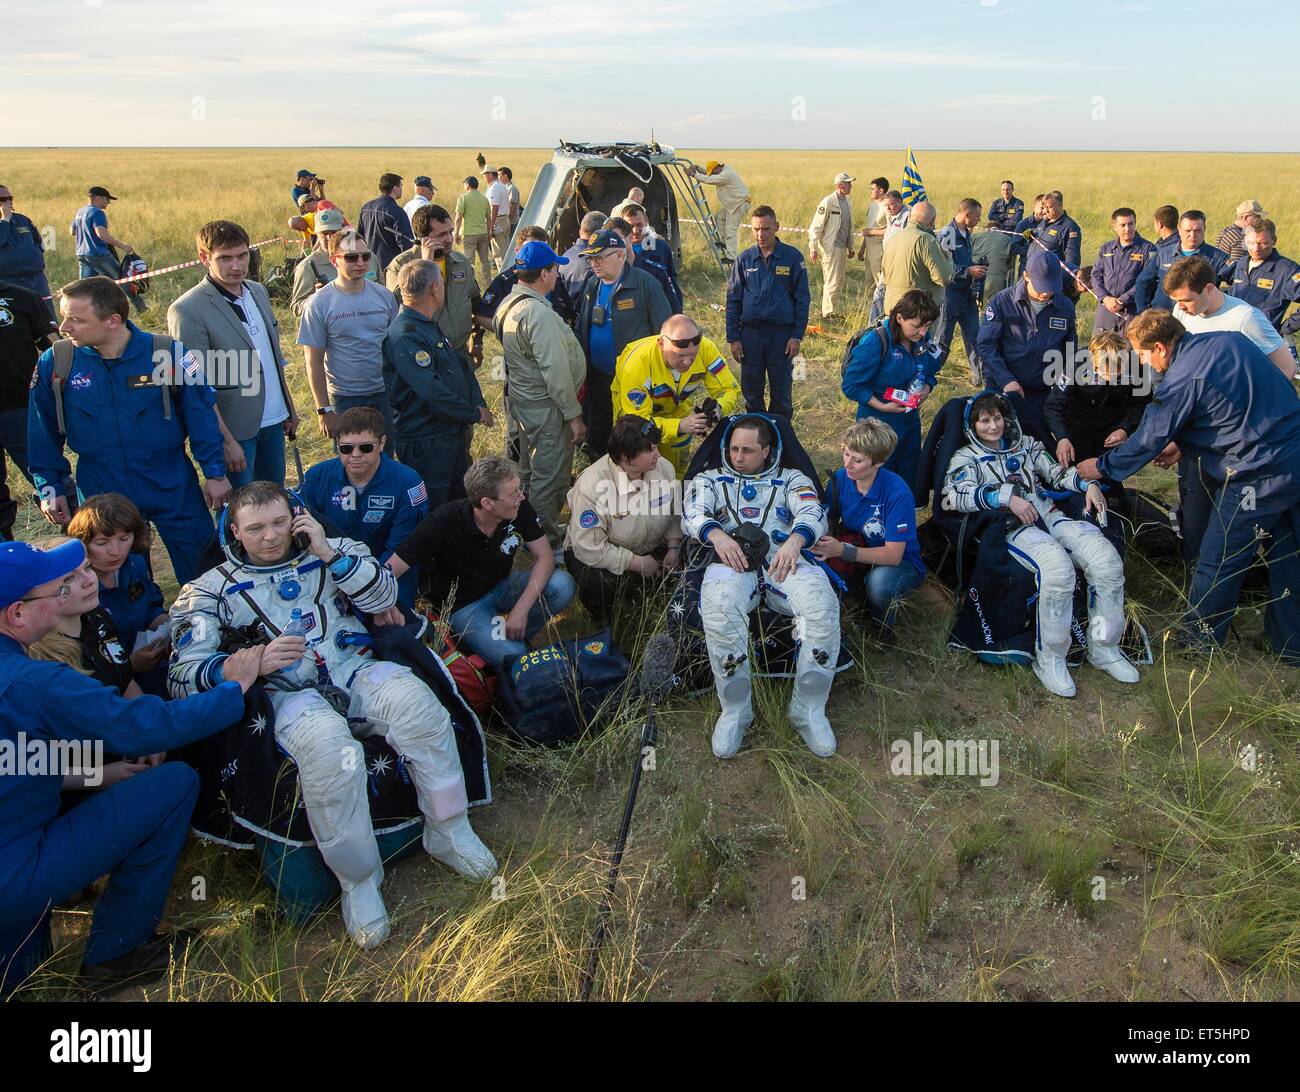 International Space Station Expedition 43 crew members commander Terry Virts of NASA and Cosmonaut Anton Shkaplerov of Roscosmos and Italian astronaut Samantha Cristoforetti from European Space Agency sit in chairs outside the Soyuz TMA-15M spacecraft just minutes after they landed in a remote area June 11, 2015 near Zhezkazgan, Kazakhstan. The crew is returning after more than six months onboard the International Space Station. Stock Photo